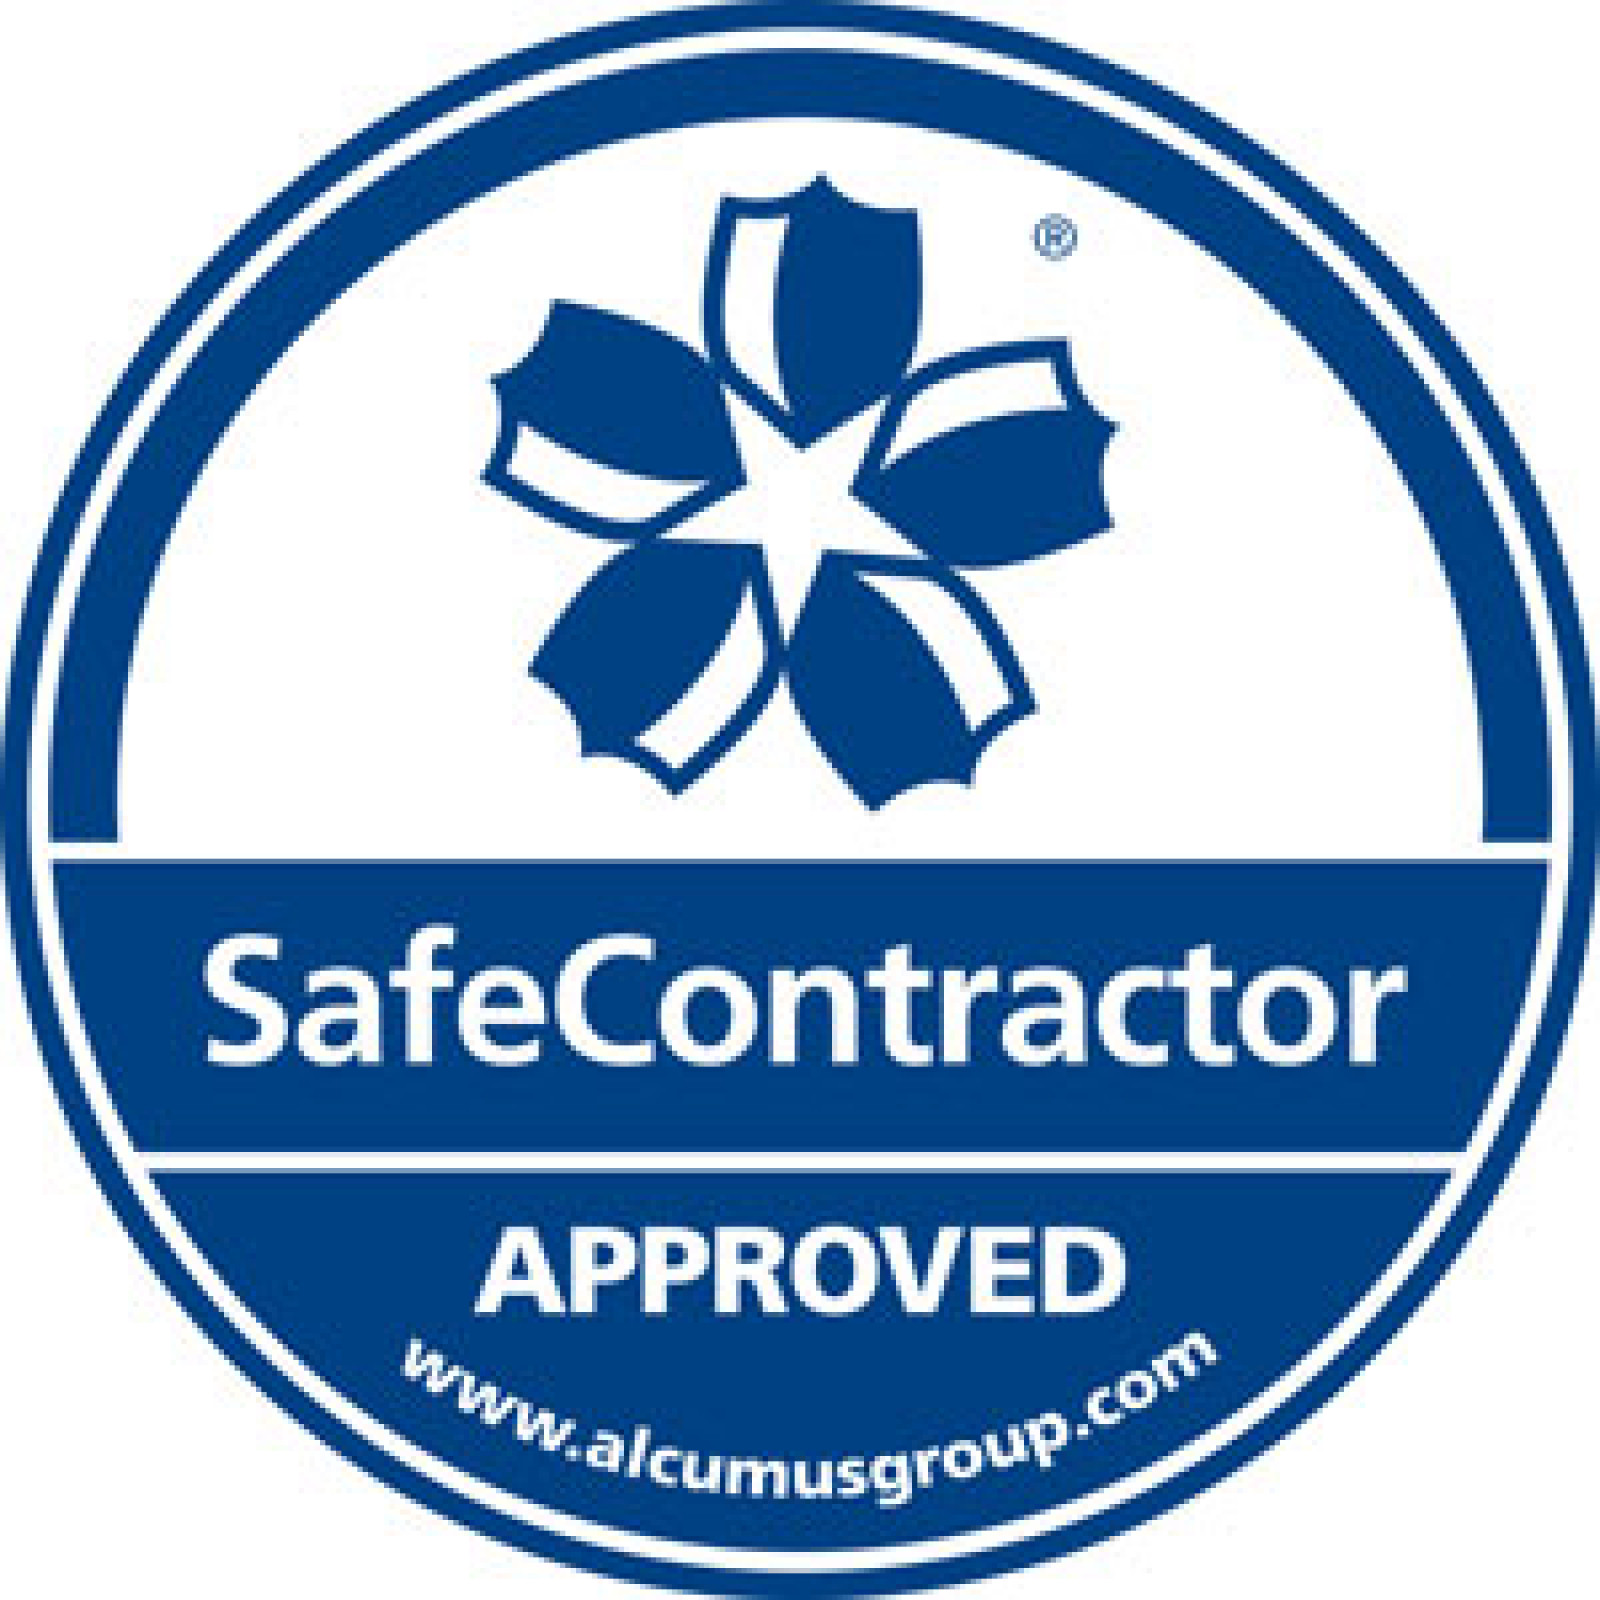 Direct Air, SafeContractor Accredited for another year!